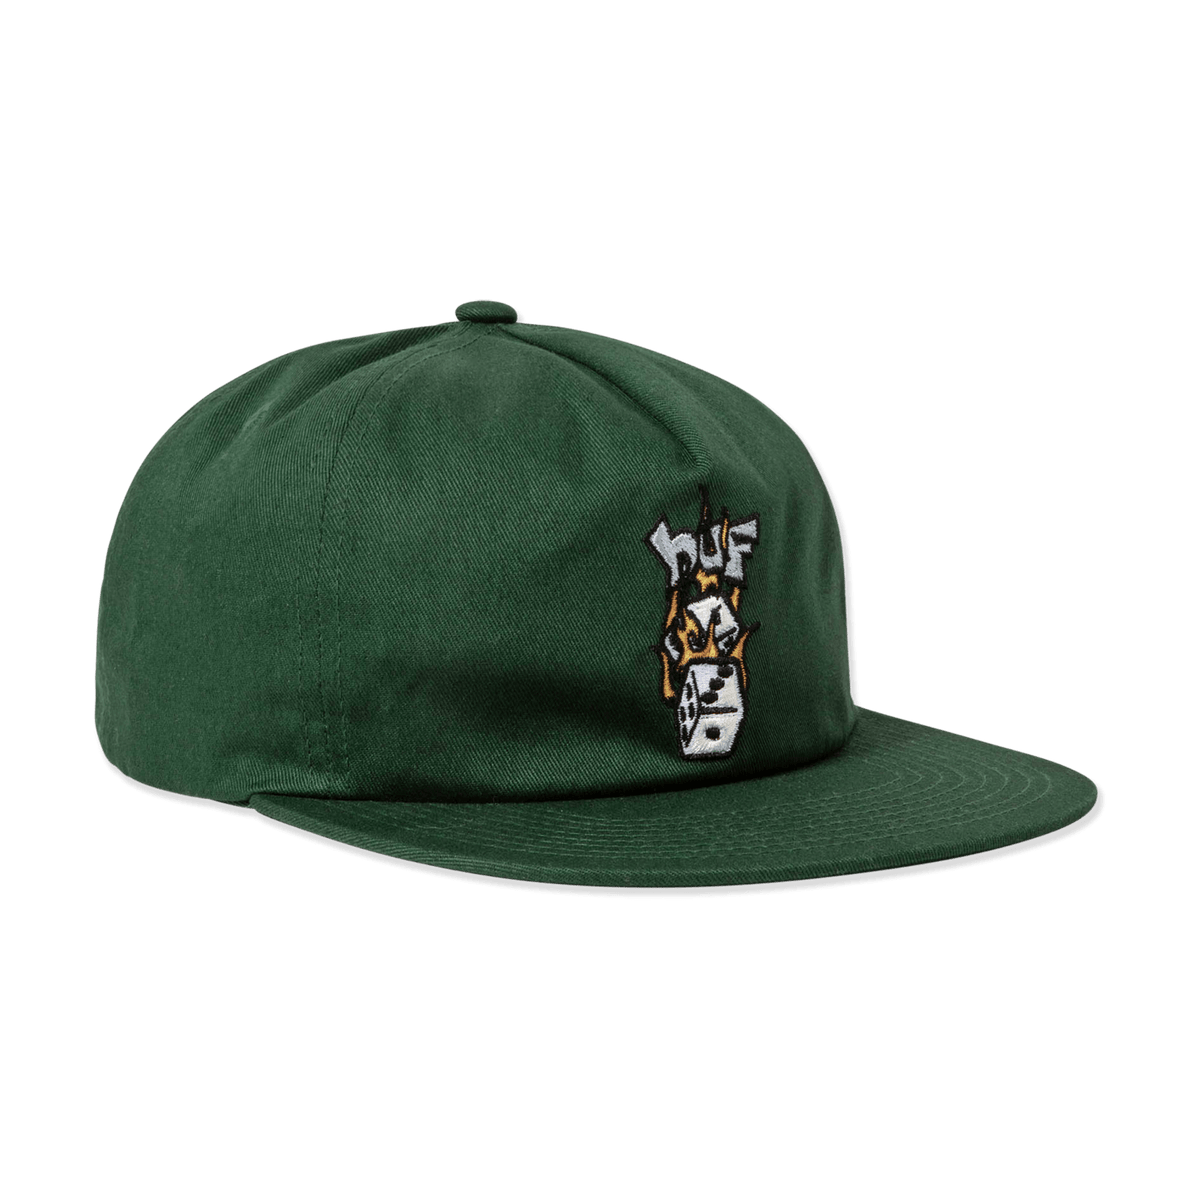 SNAPBACK-CASQUETTE-DICEY-HUF-DM2-SHOP-GREEN-01